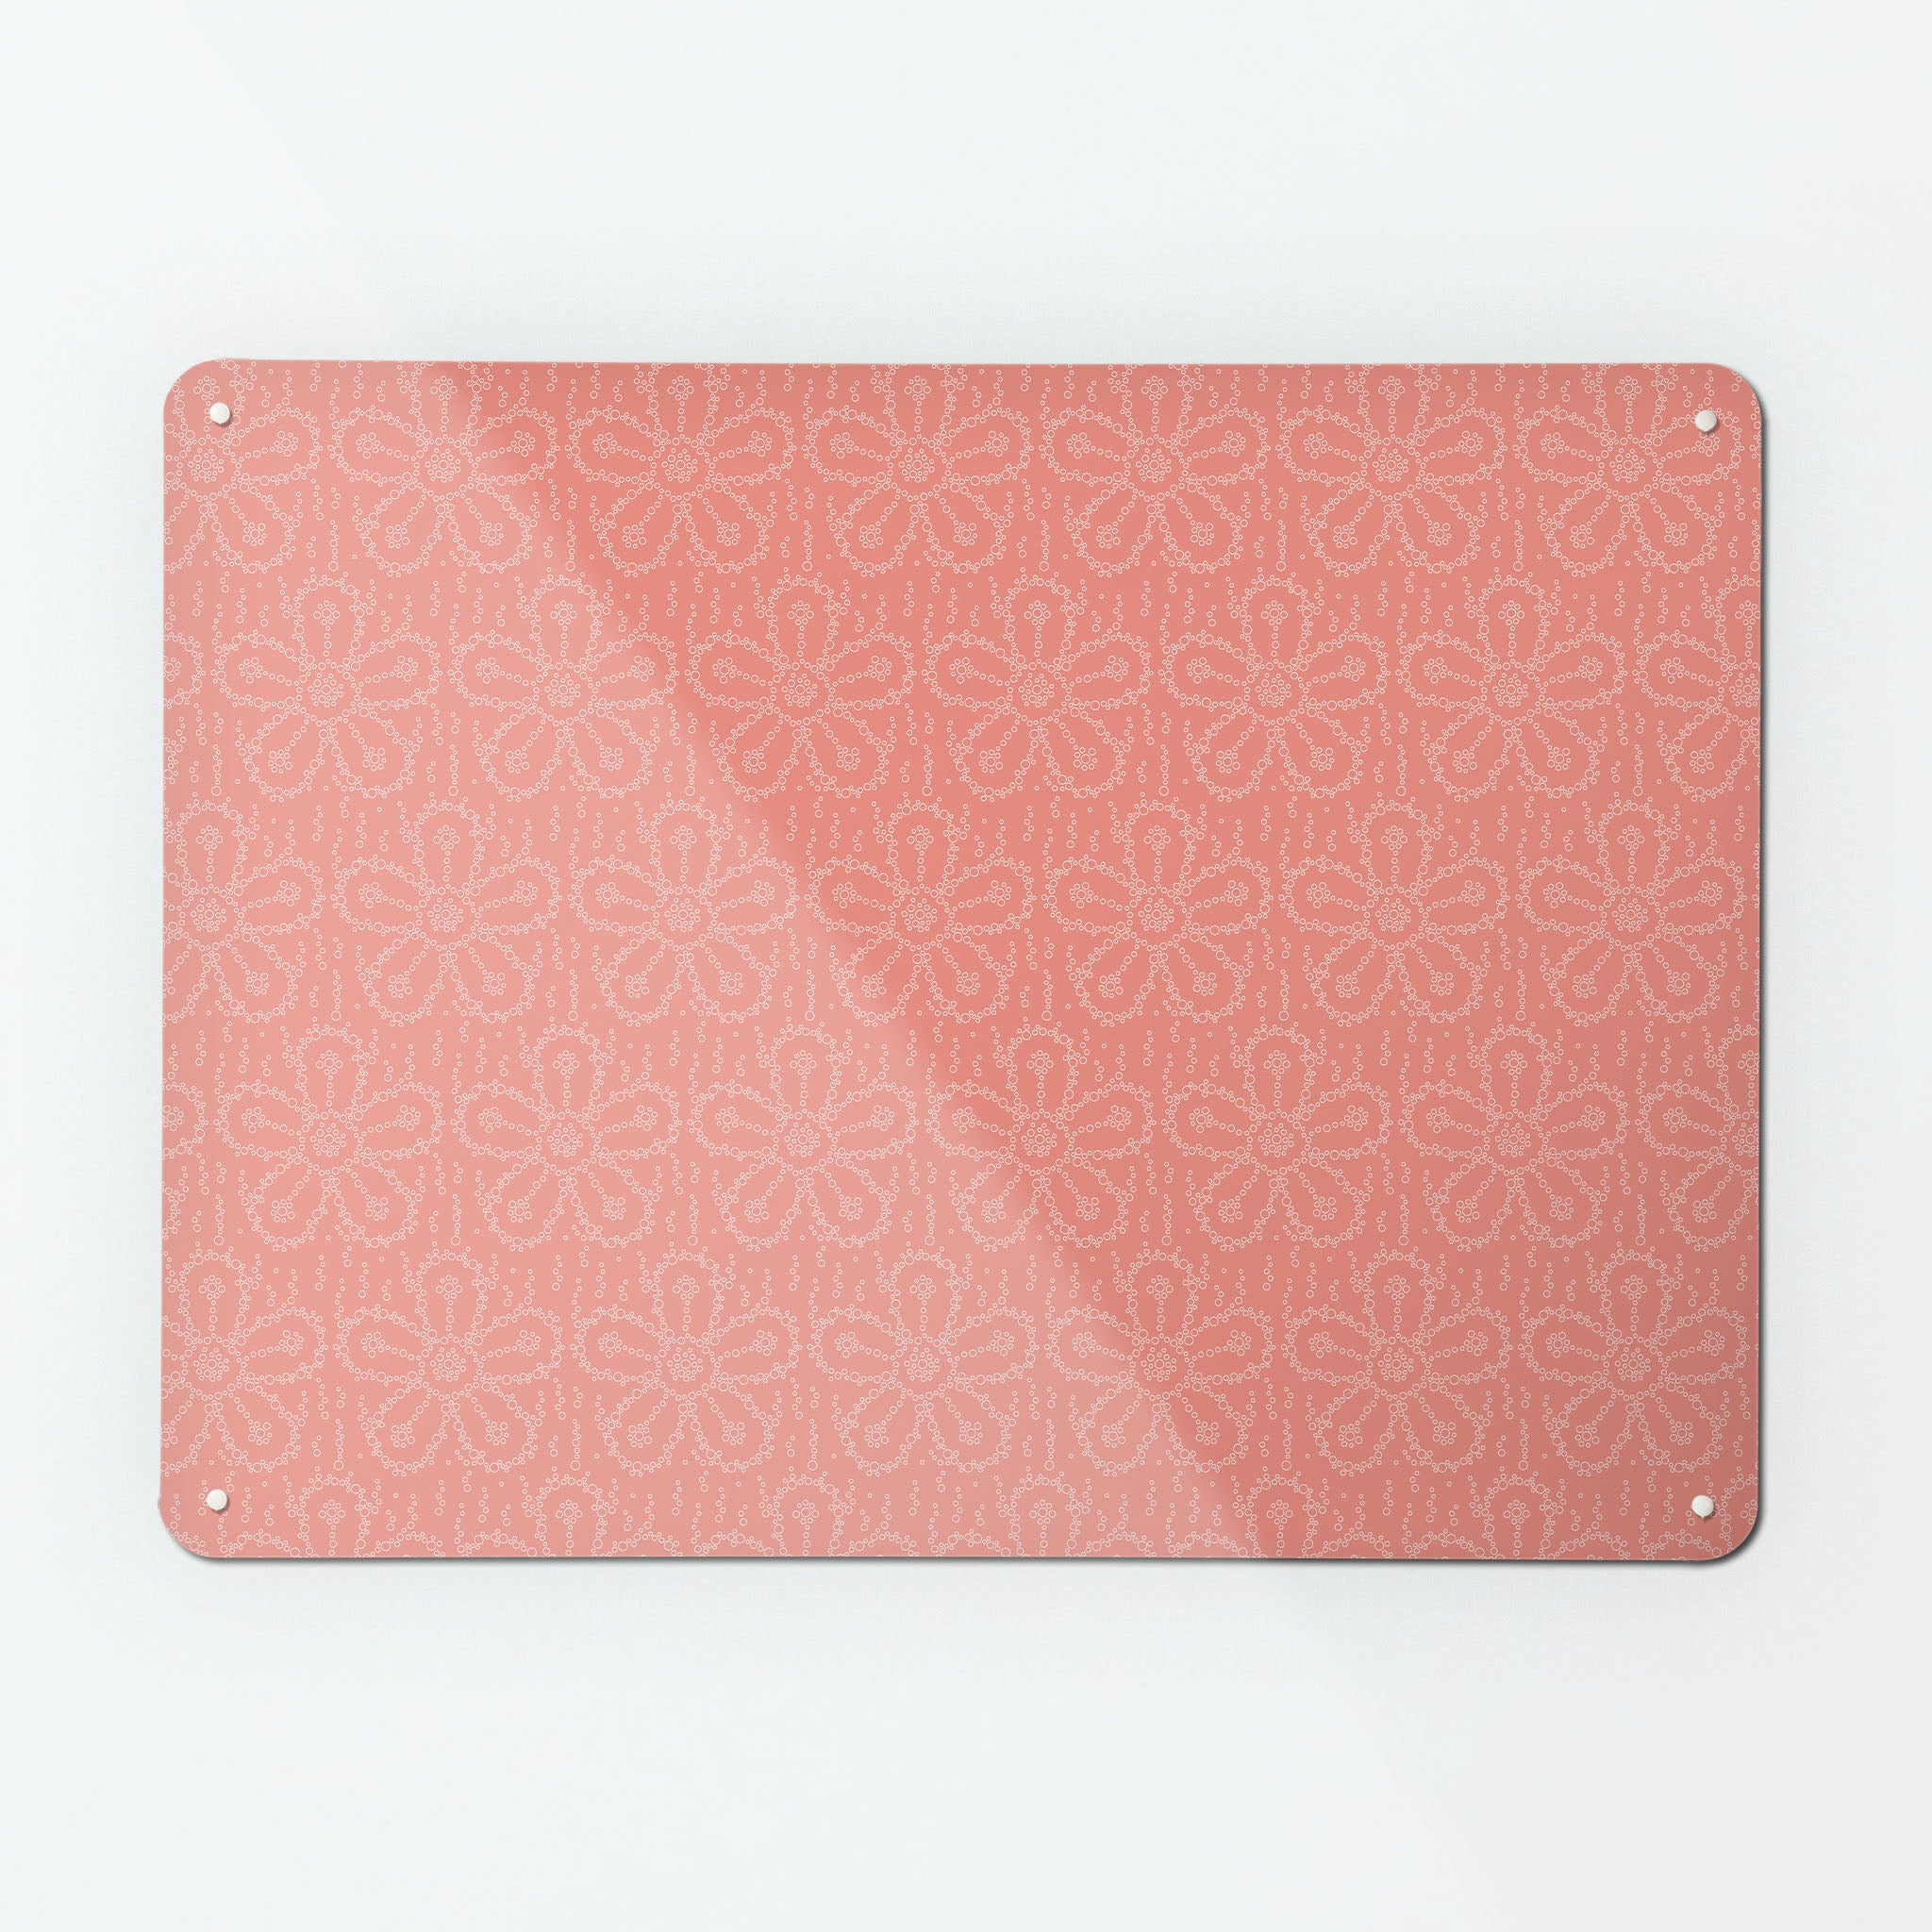 A large magnetic notice board by Beyond the Fridge with a fizzy flower pattern in pink fizz colour